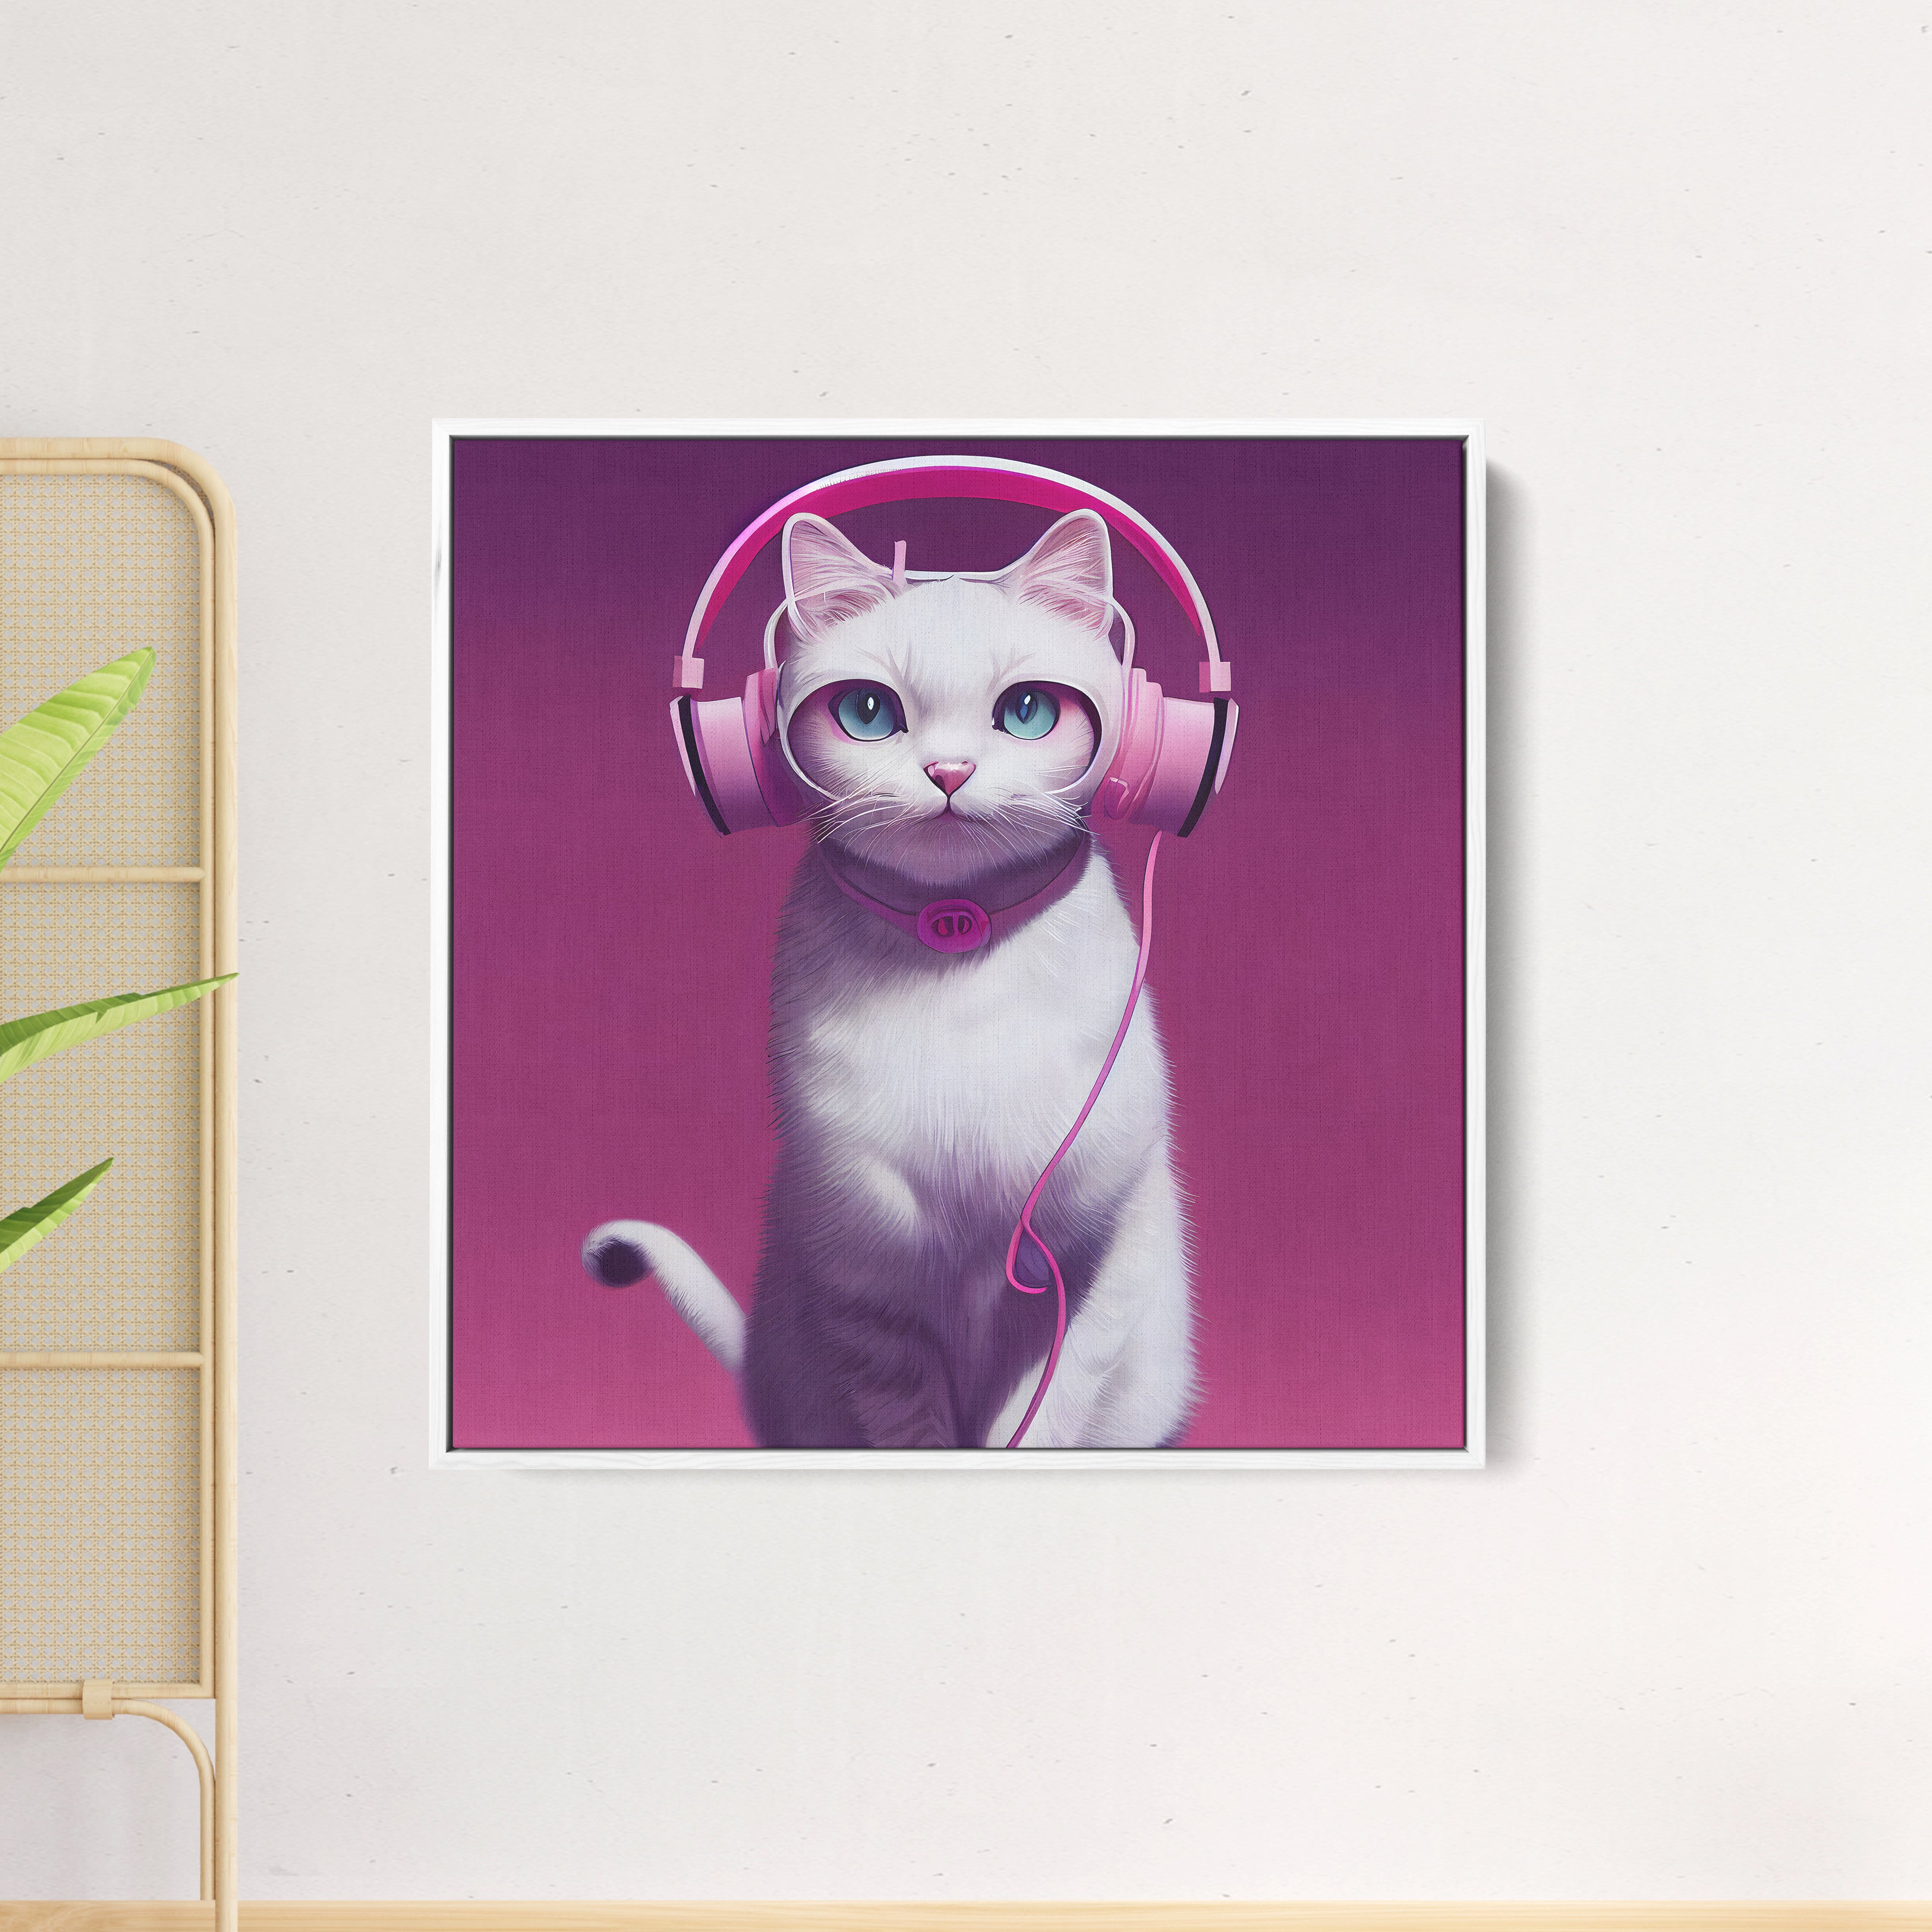 Cute White Cat Wearing Headphone Canvas Wall Painting